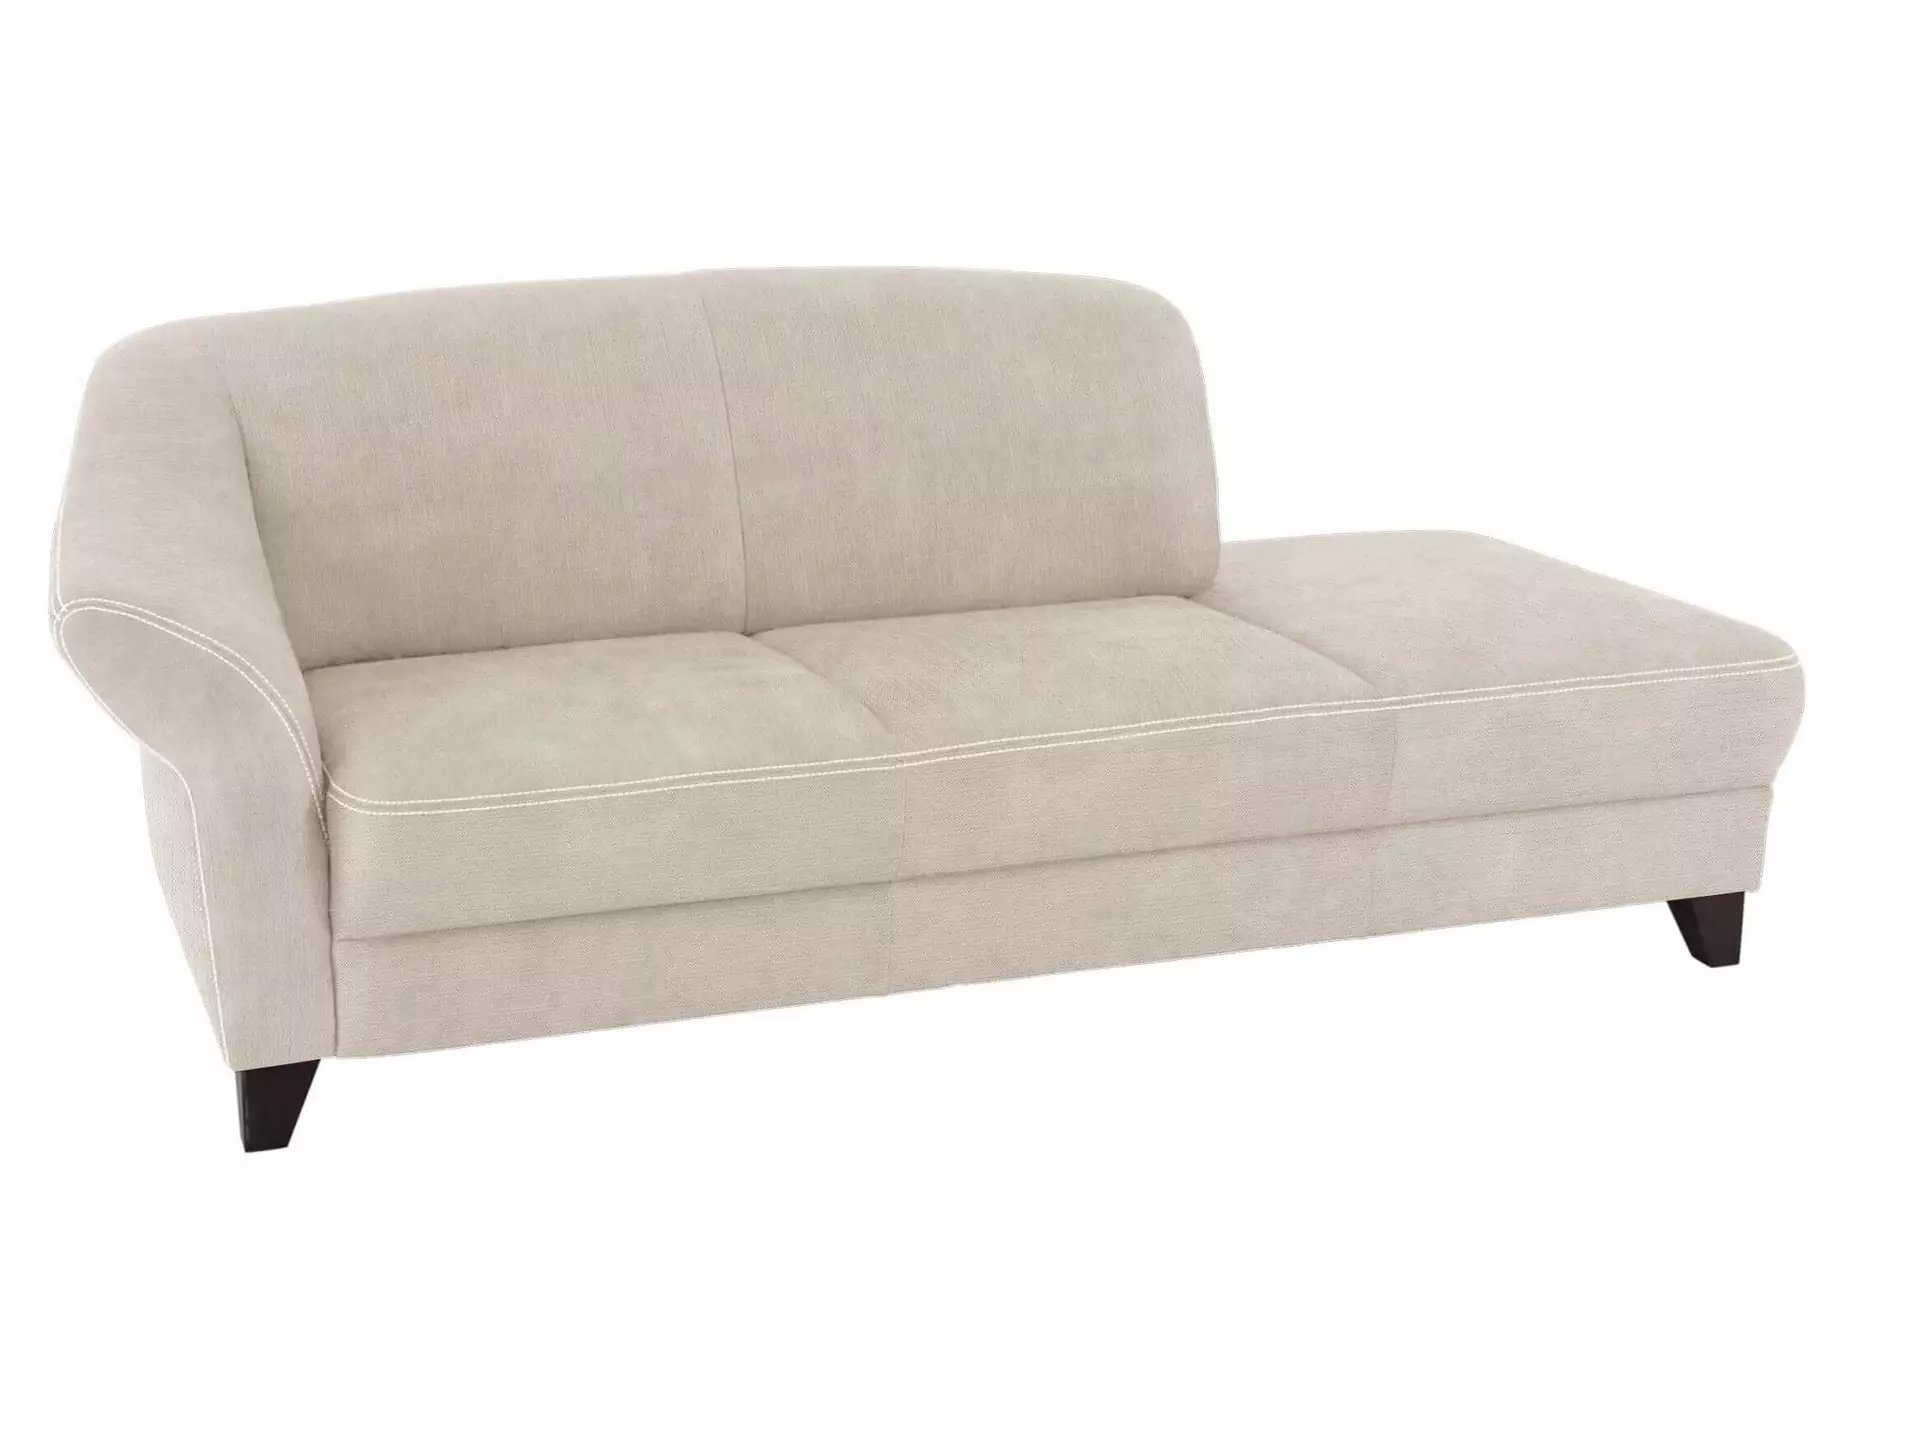 Liegesofa Klosters Basic Ponsel / Farbe: Ecru / Material: Stoff Basic